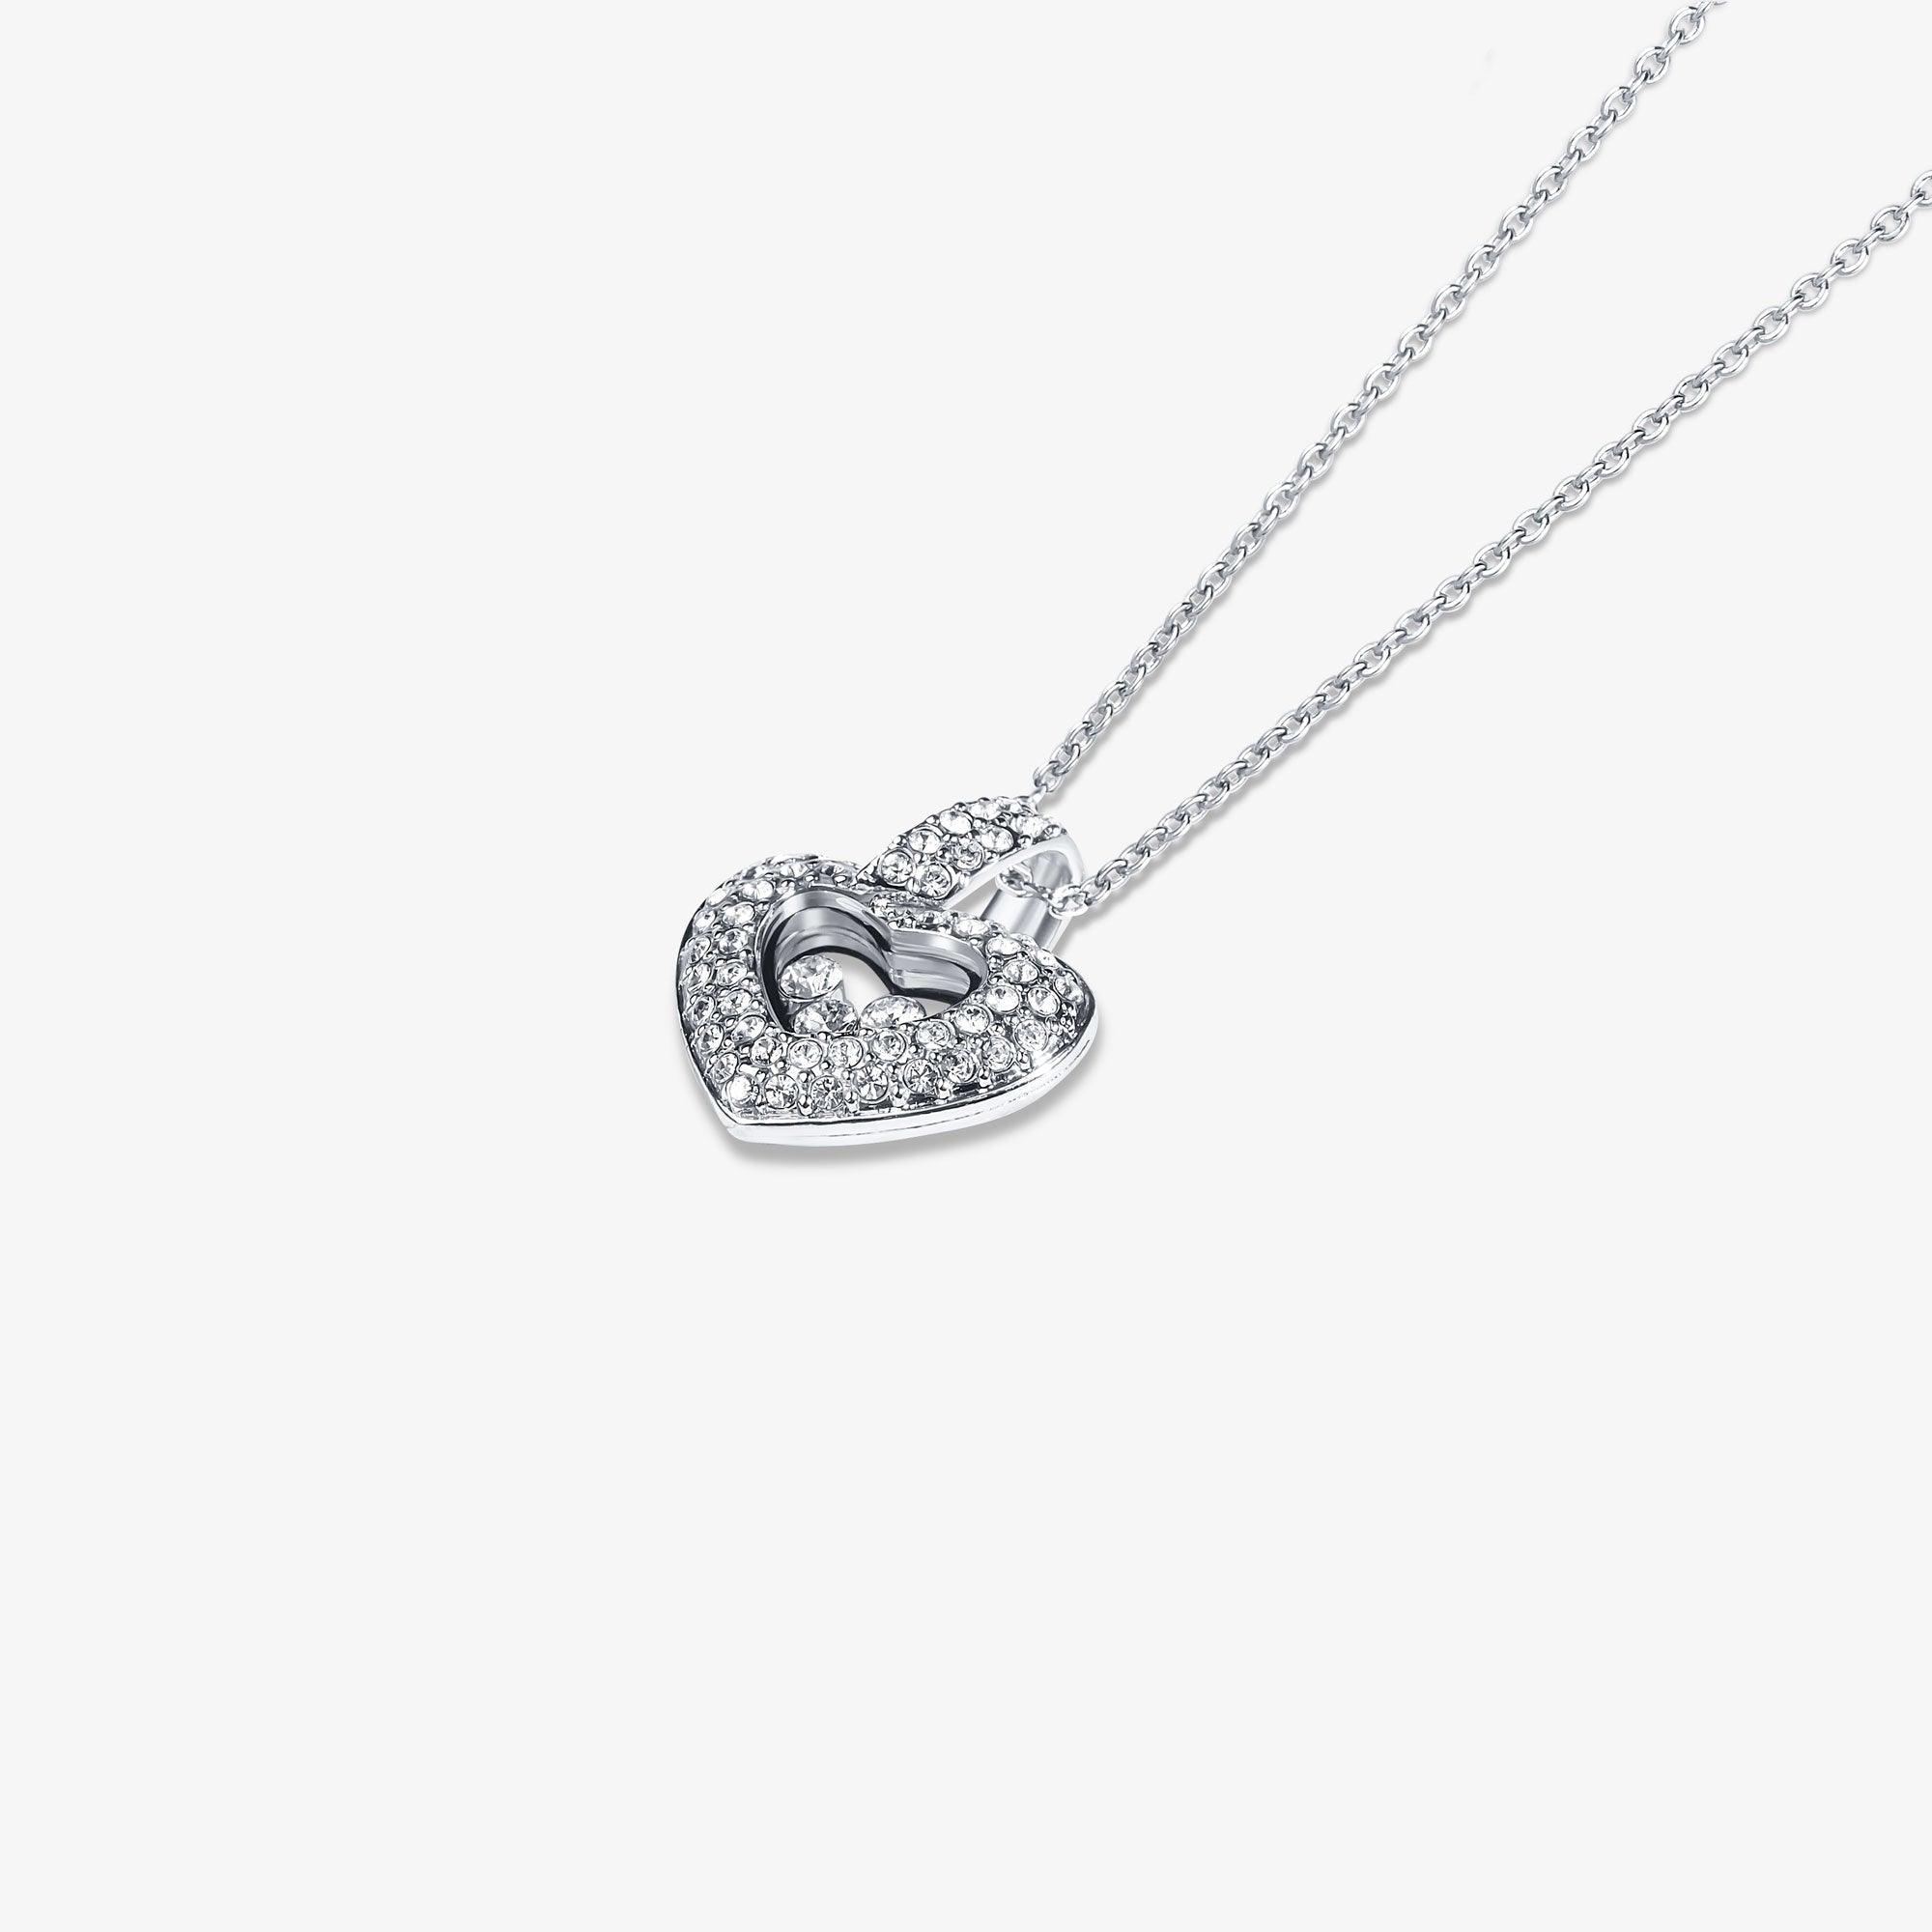 To My Beautiful Wife - You Are The Light Of My Life and My Entire World - Tryndi Floating Heart Necklace - TRYNDI